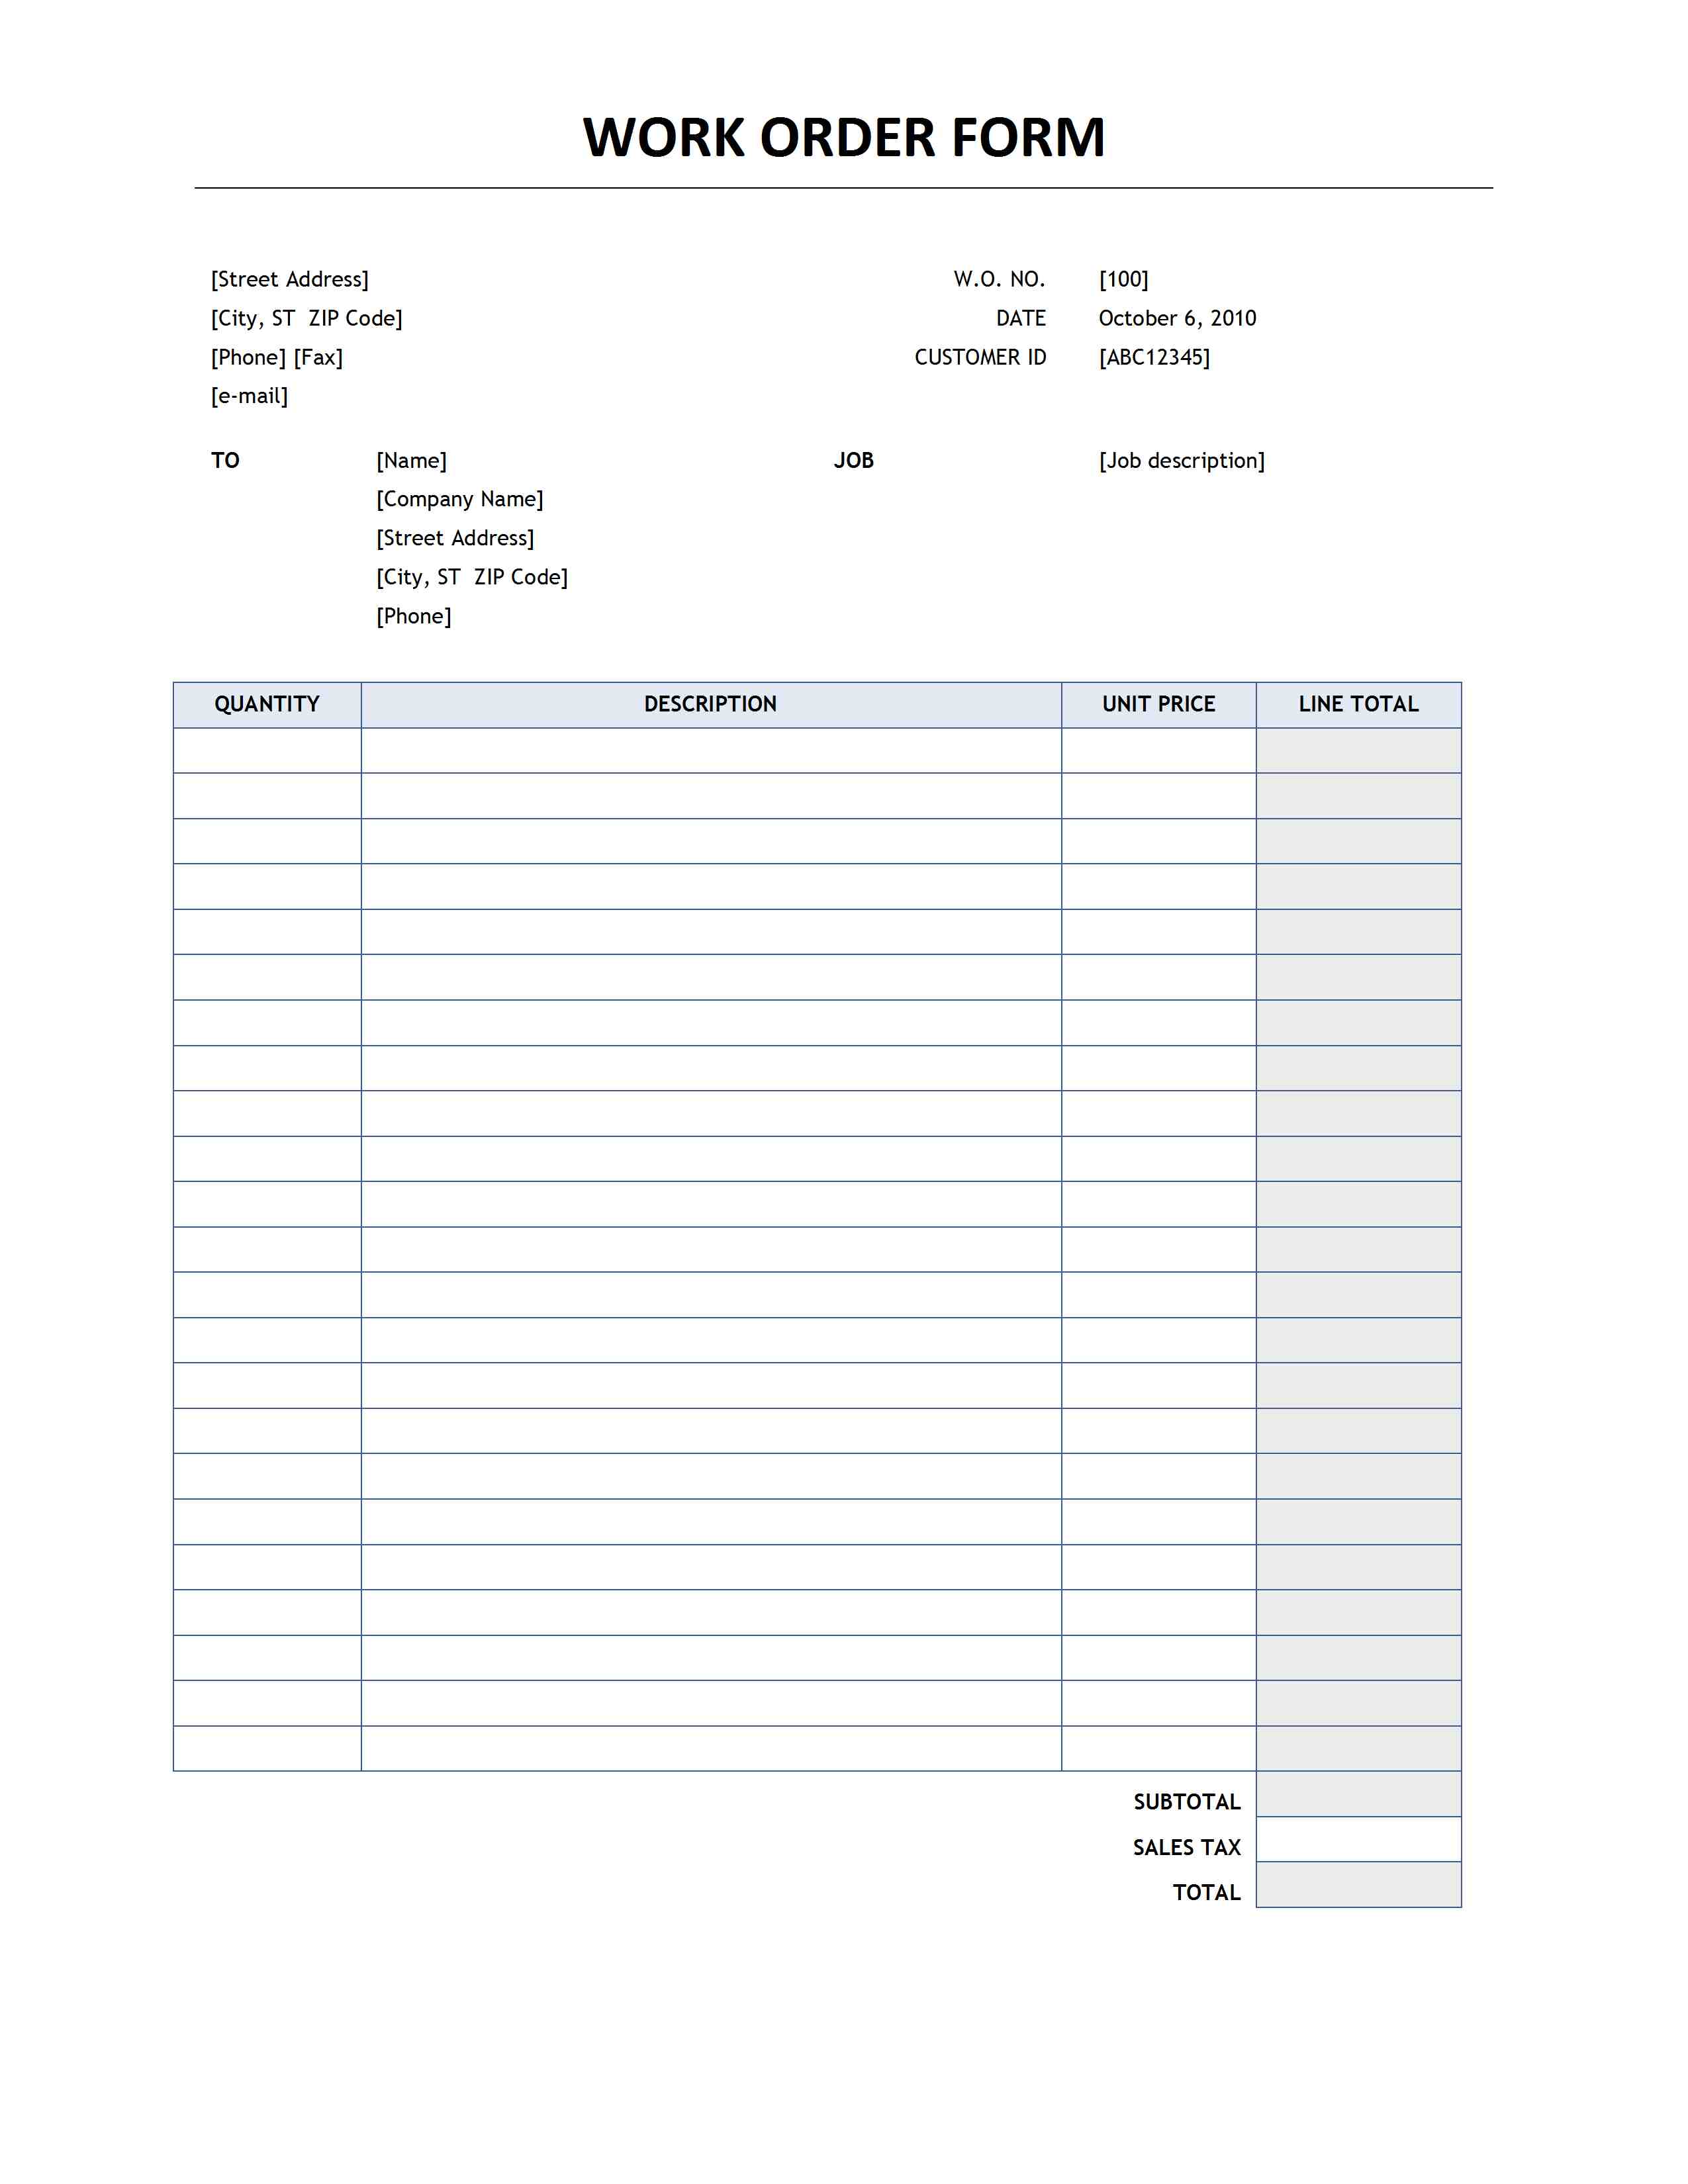 free work order forms printable   April.onthemarch.co